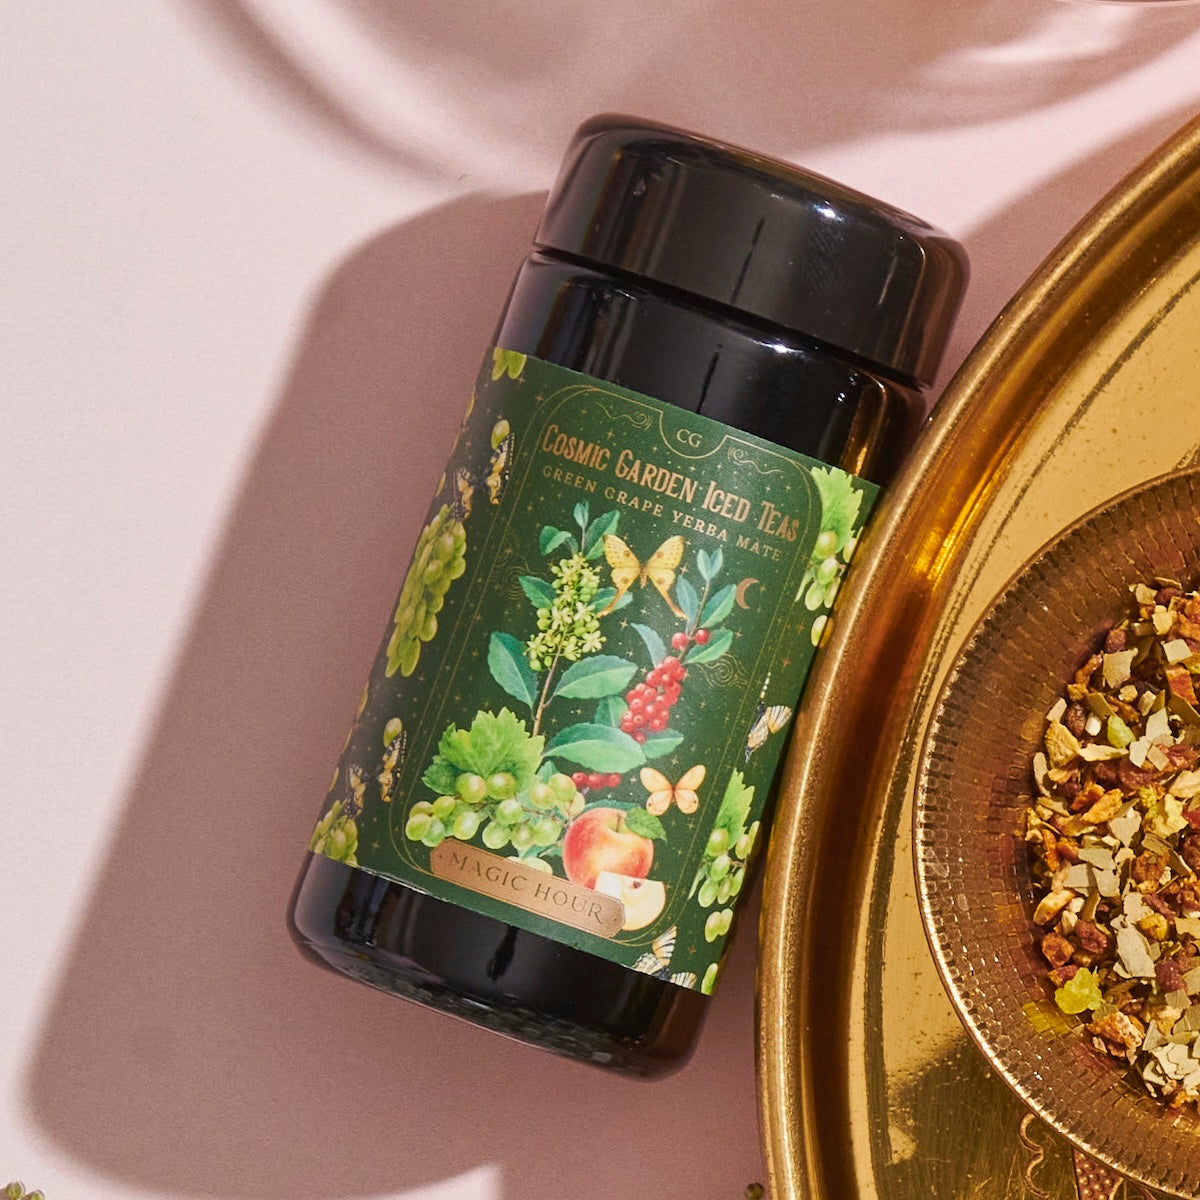 A black cylindrical container labeled "Green Grape Yerba Mate: Cosmic Garden Iced Tea" from Magic Hour is placed next to a gold dish filled with organic loose leaf tea leaves and herbs. The backdrop is a light pink surface with shadows adding depth.